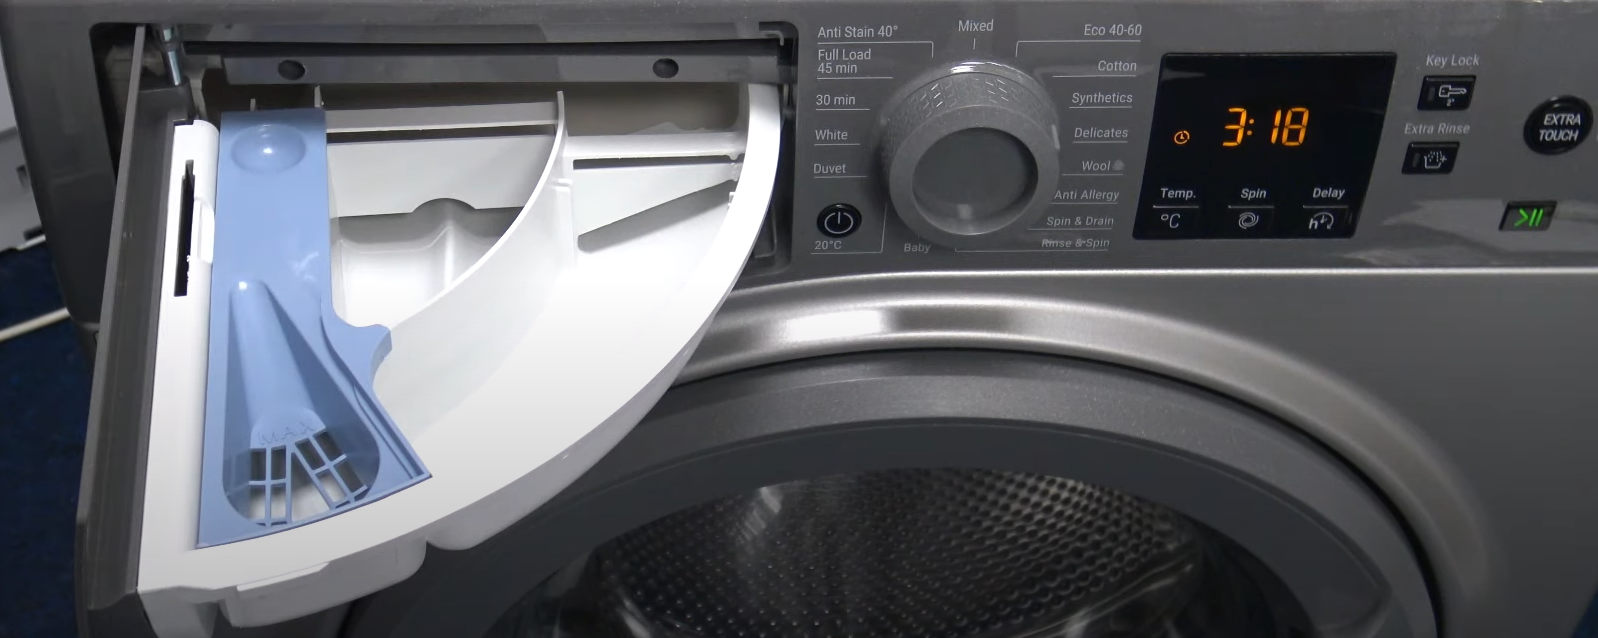 Hotpoint Washing Machine with soap tray open